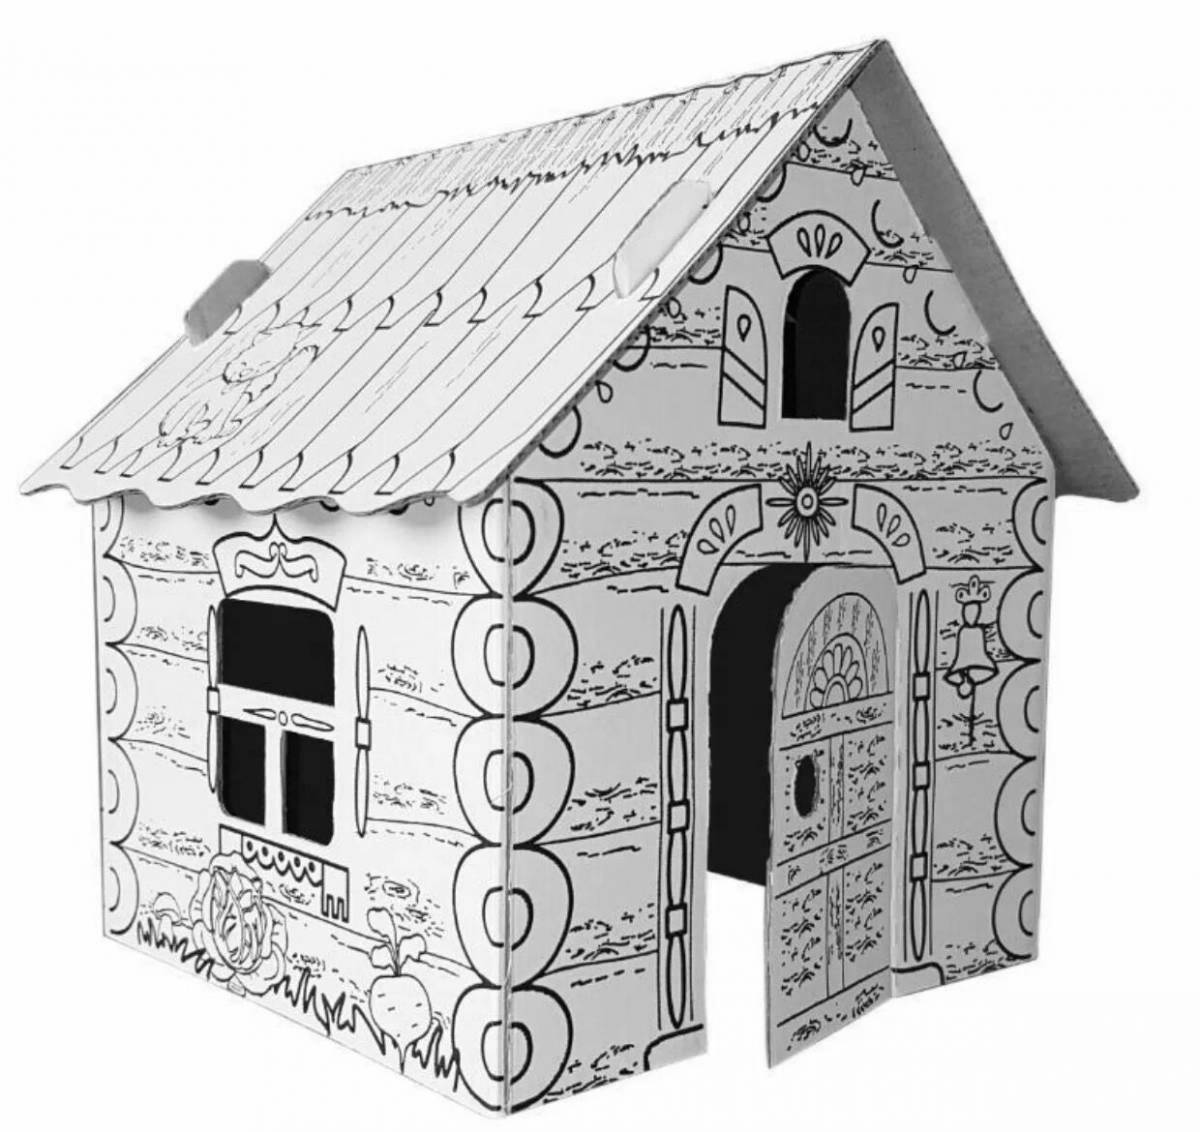 Coloring page mesmerizing ozone house